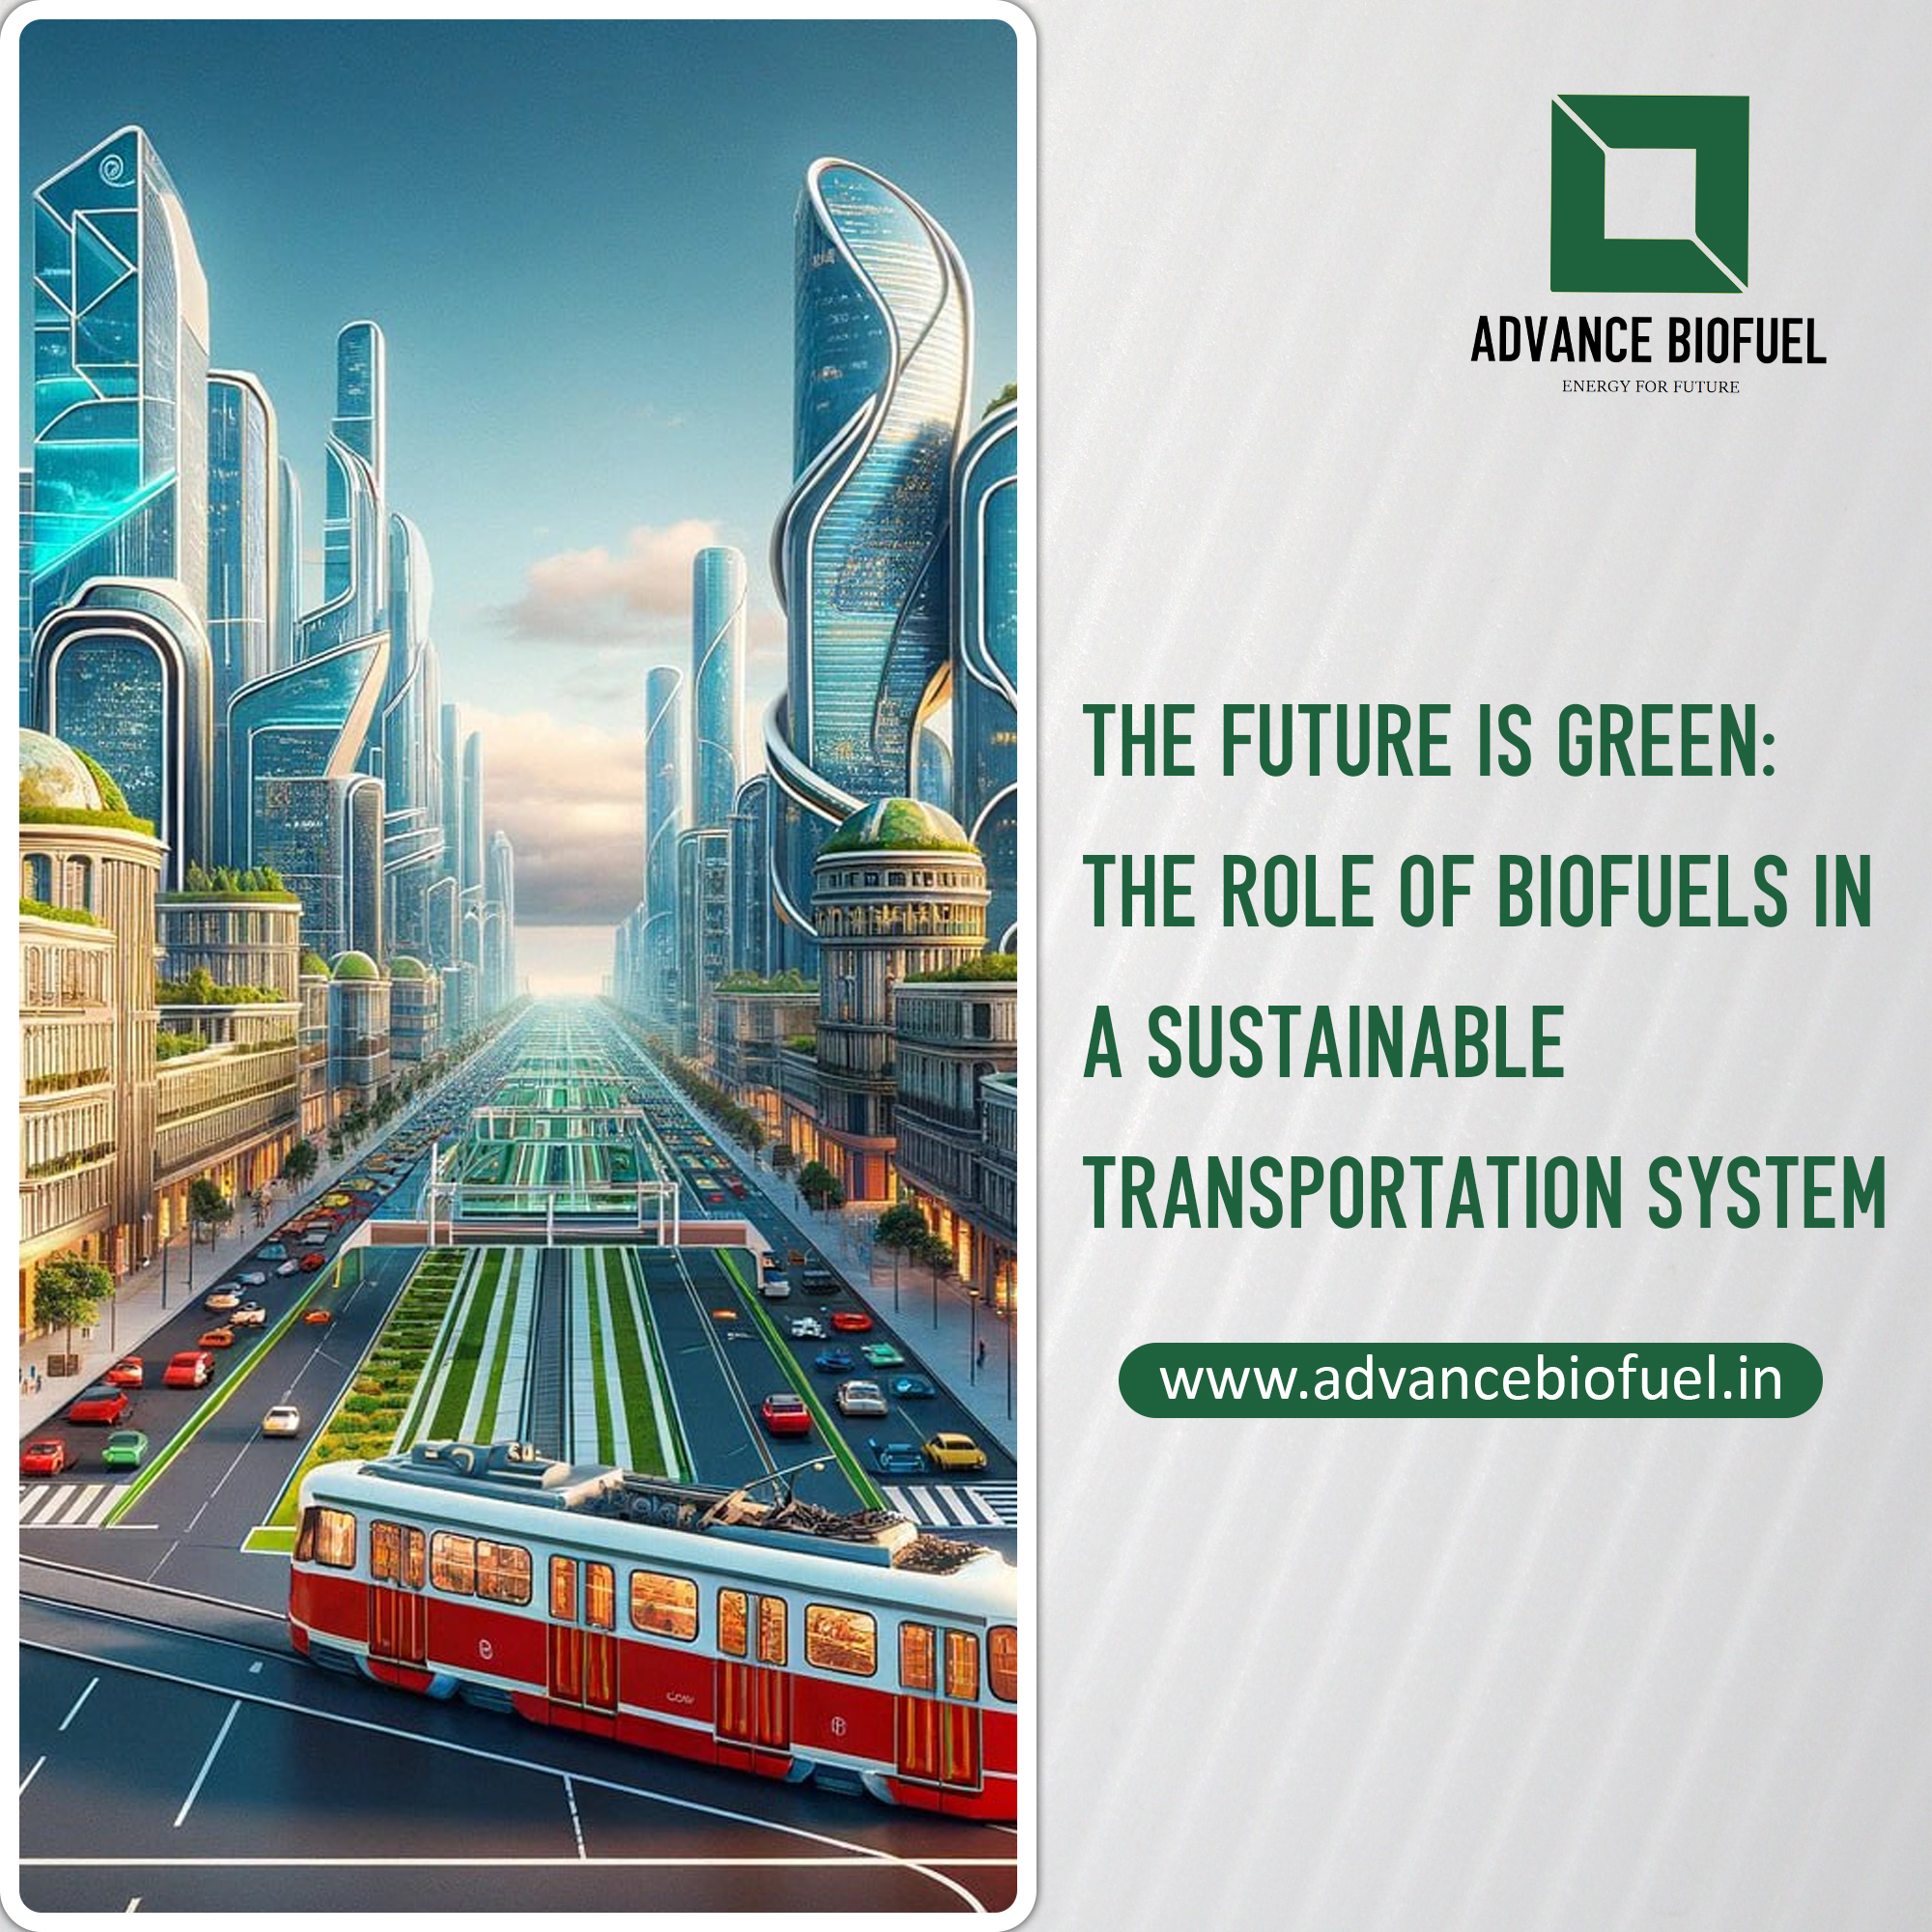 The Future is Green: The Role of Biofuels in a Sustainable Transportation System